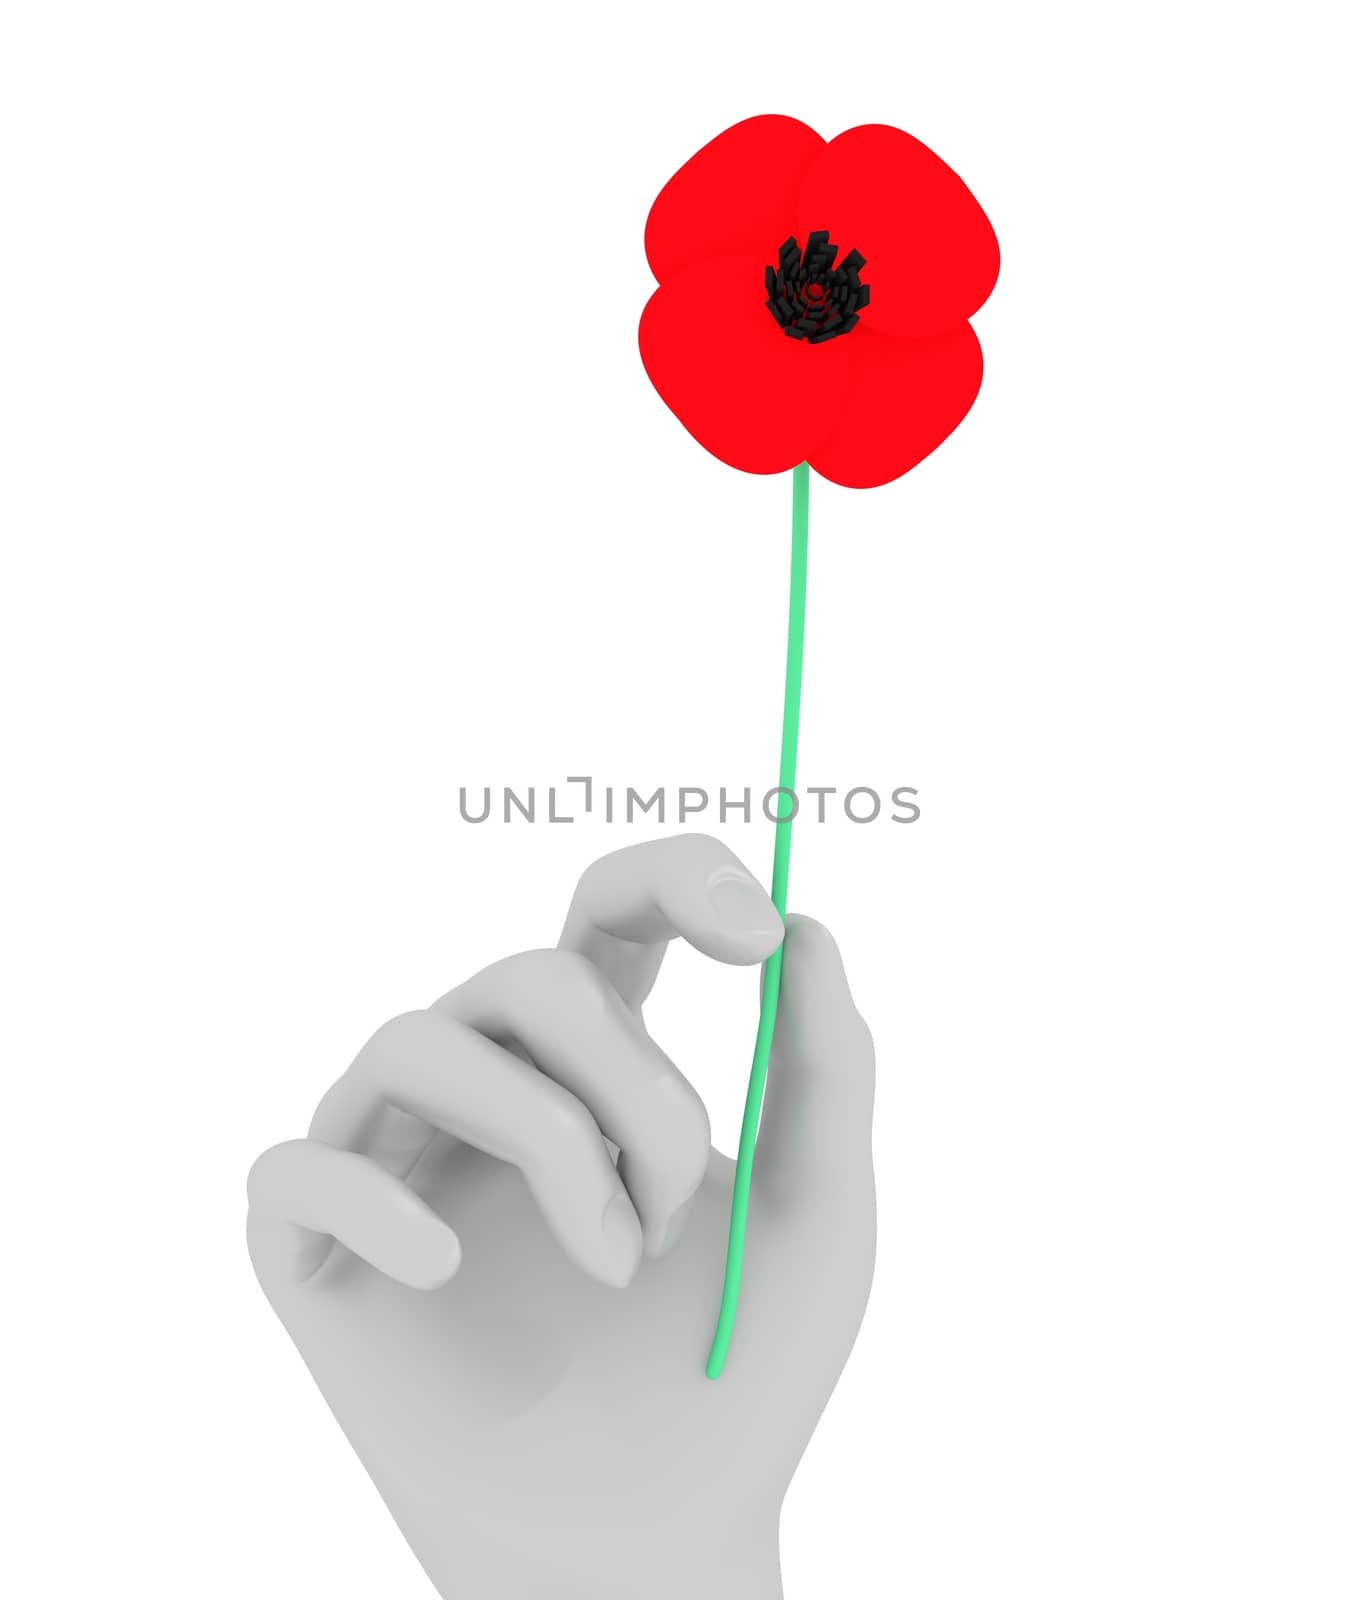 Illustration of a hand holding a Poppy flower